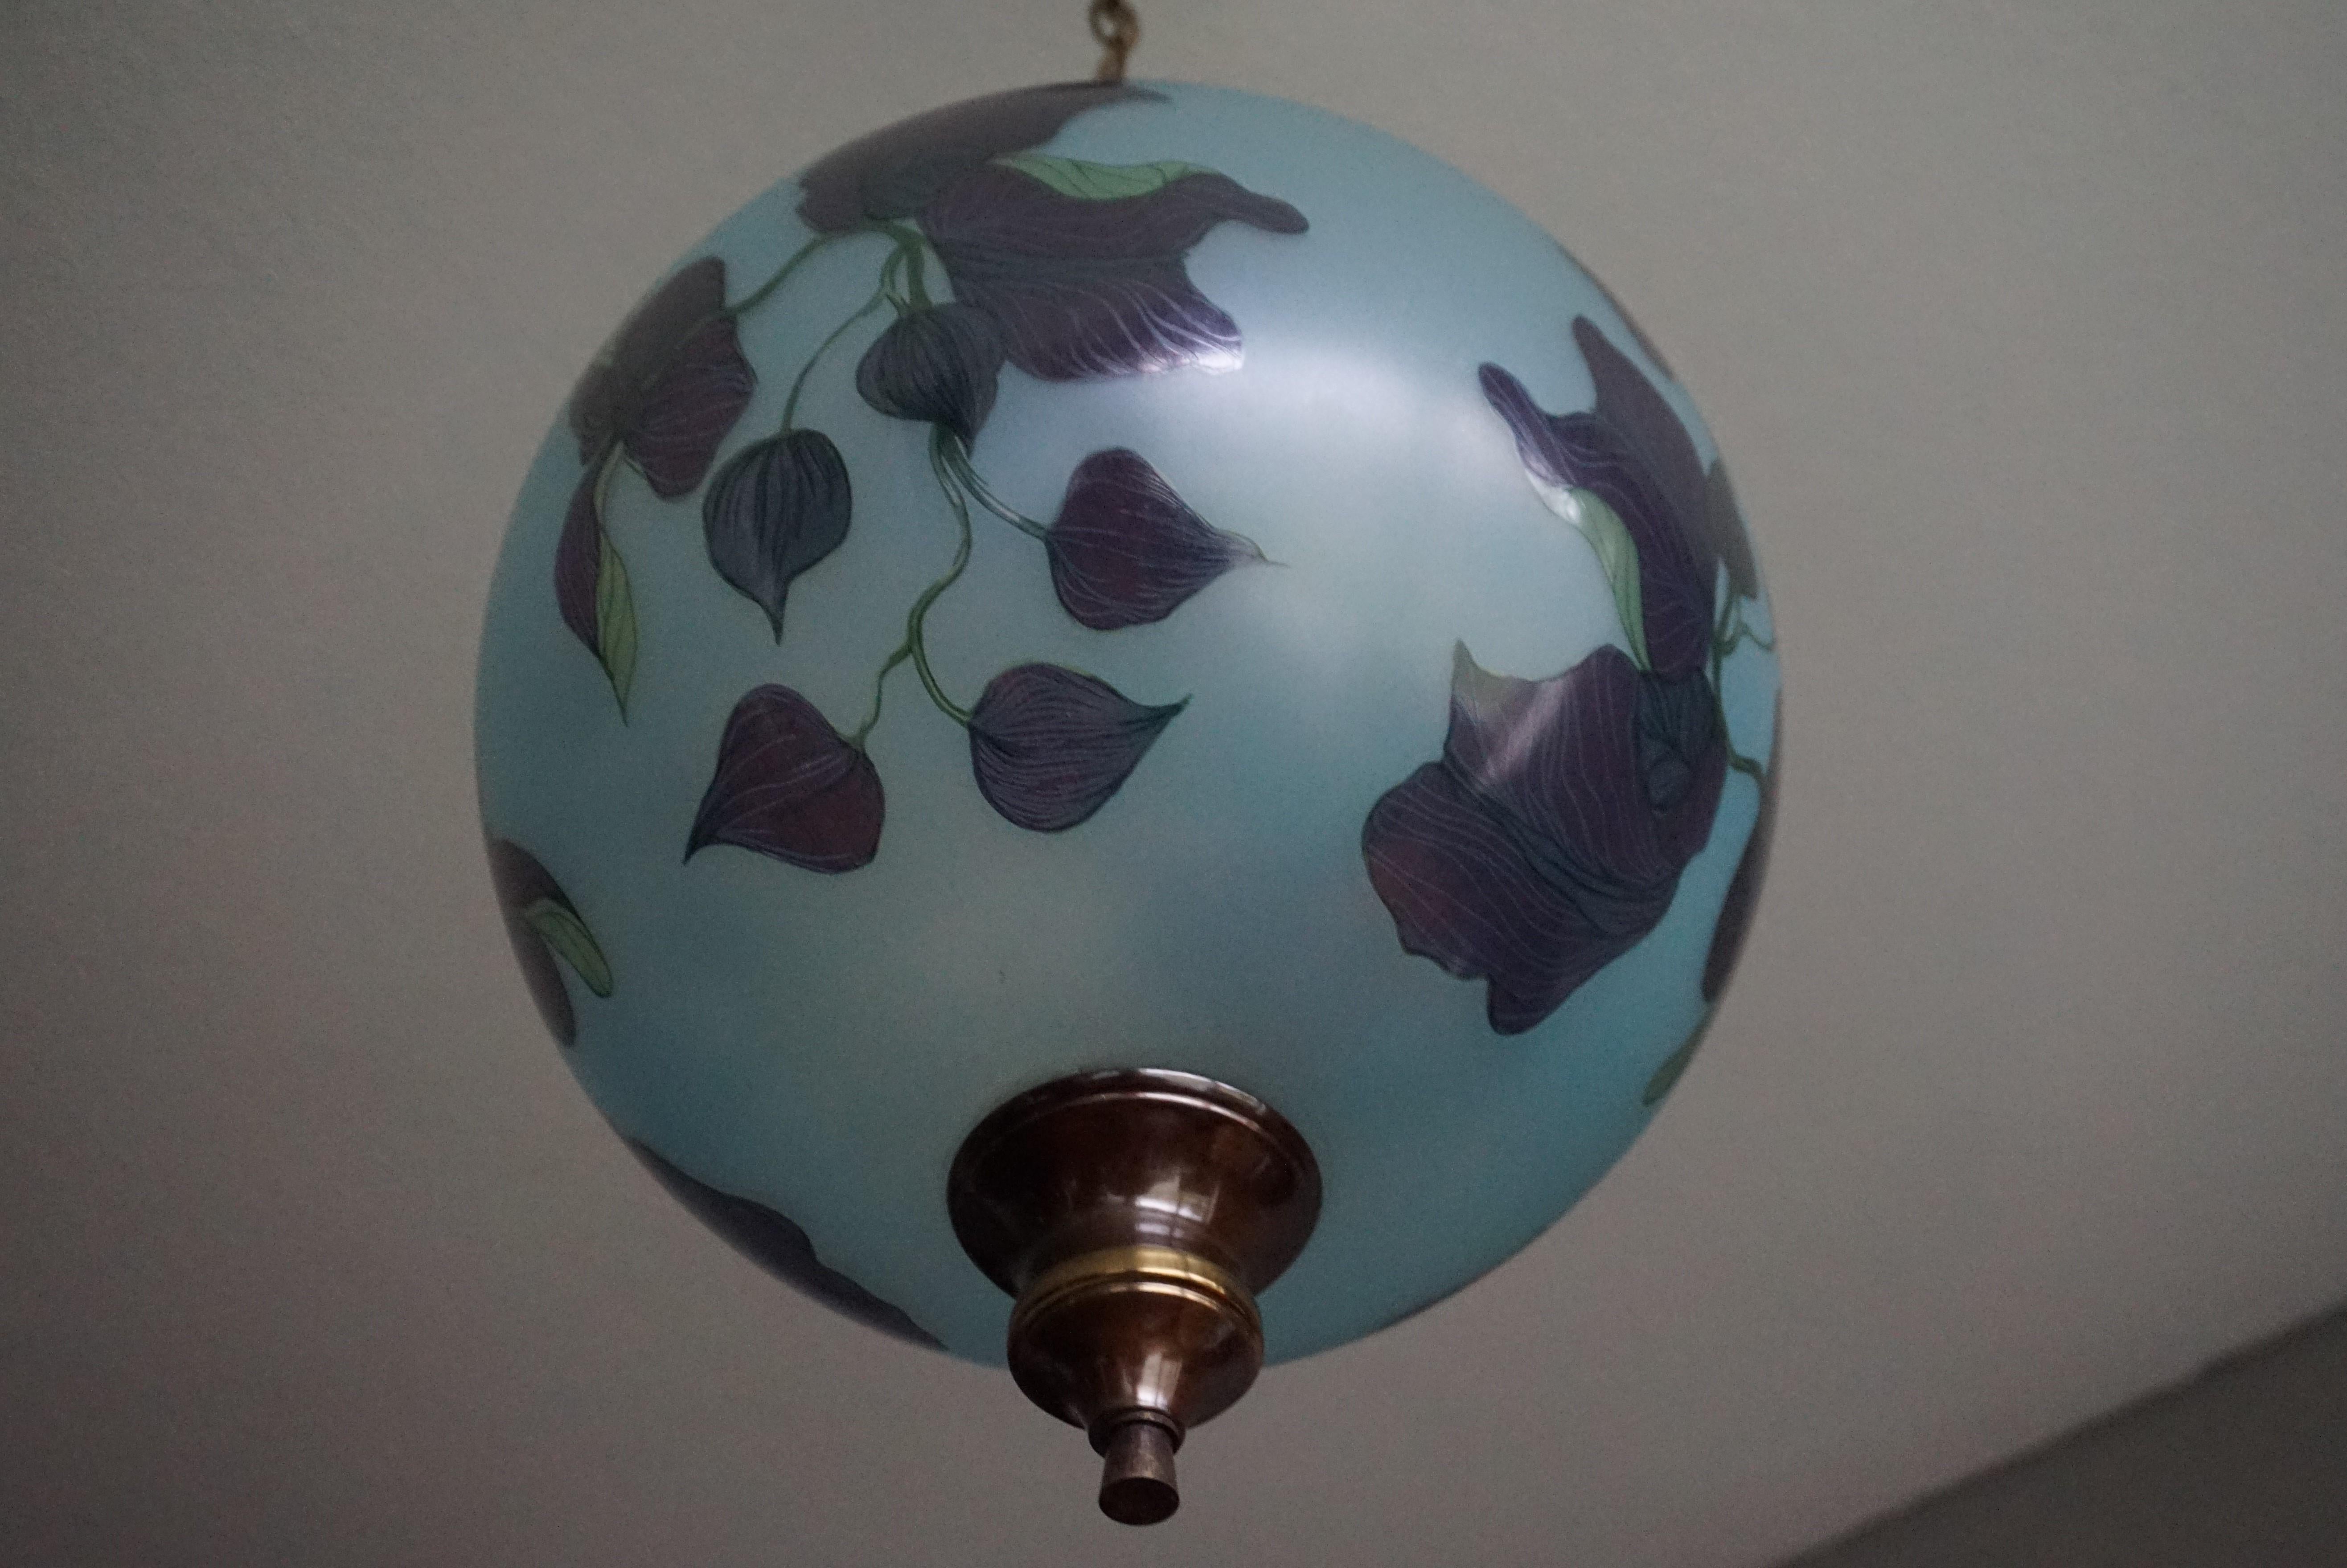 Hand-Crafted Rare Pair of Midcentury Made Glass Globe Pendant Lights with Jugendstil Flowers